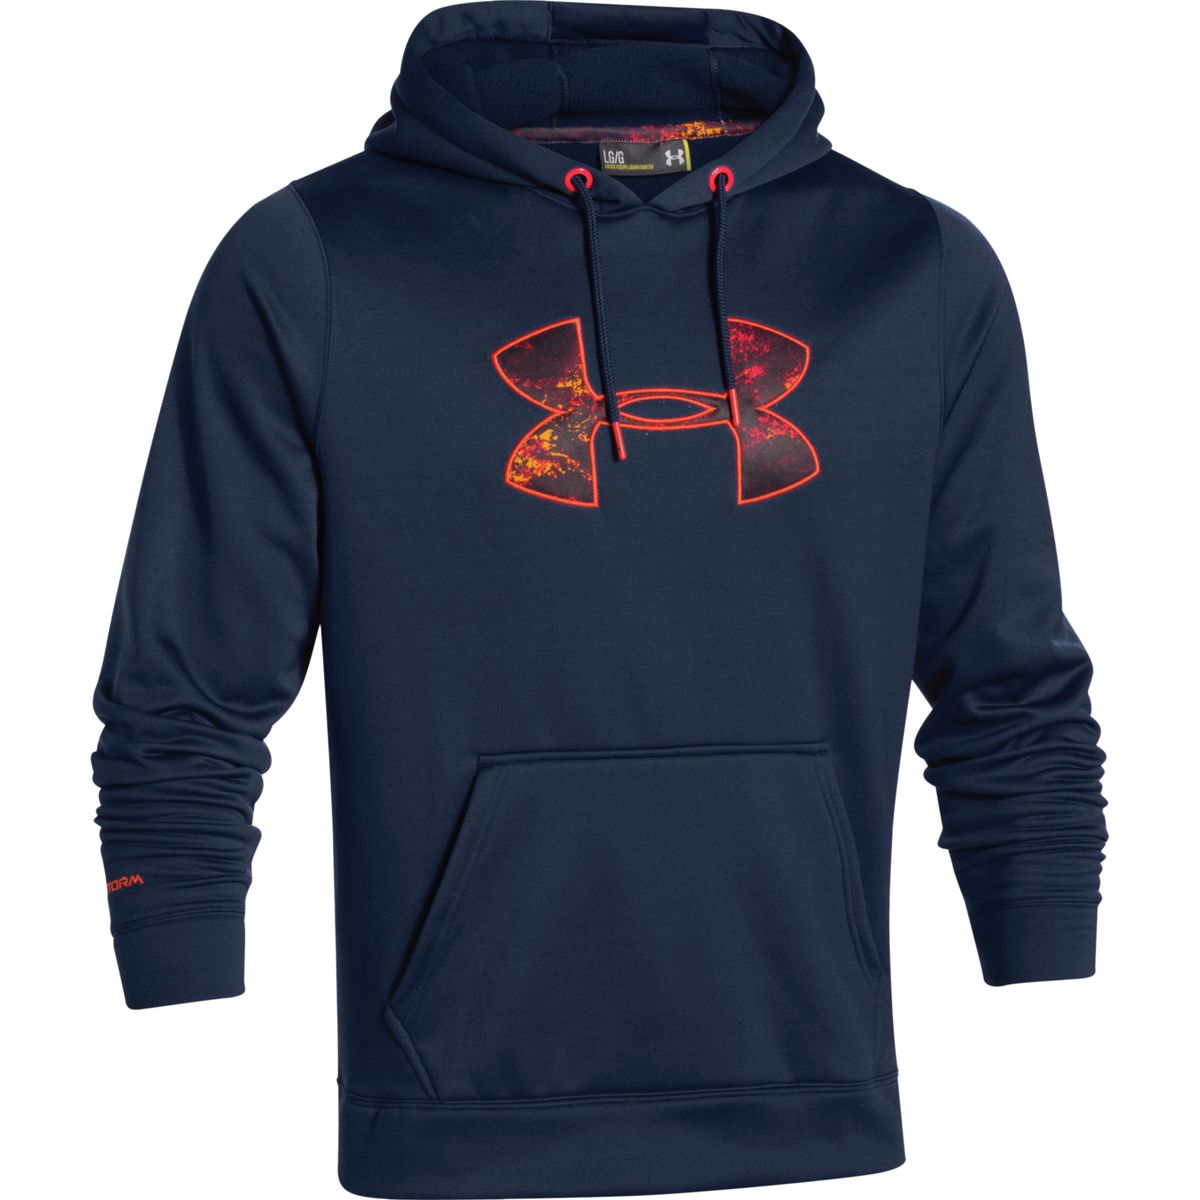 Under Armour Rival Cotton Pullover Hoodie - Men's | eBay